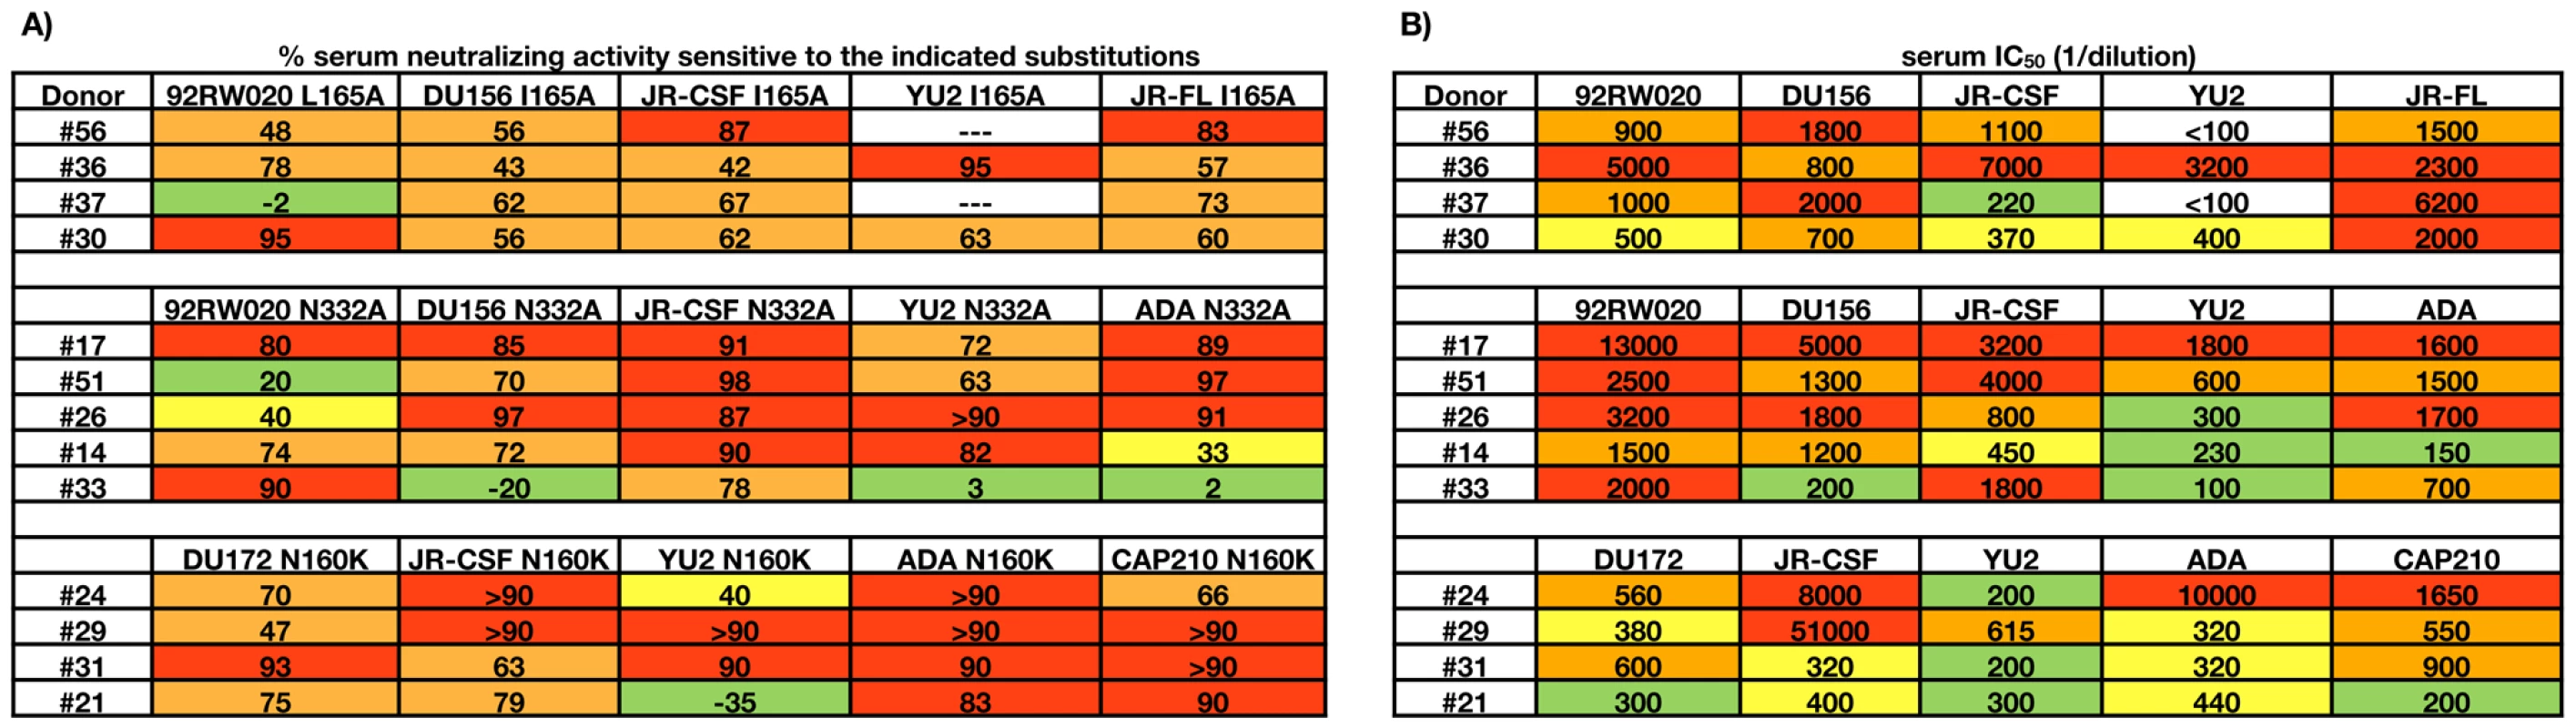 Effects of single amino acid substitutions on broad serum neutralizing activity.